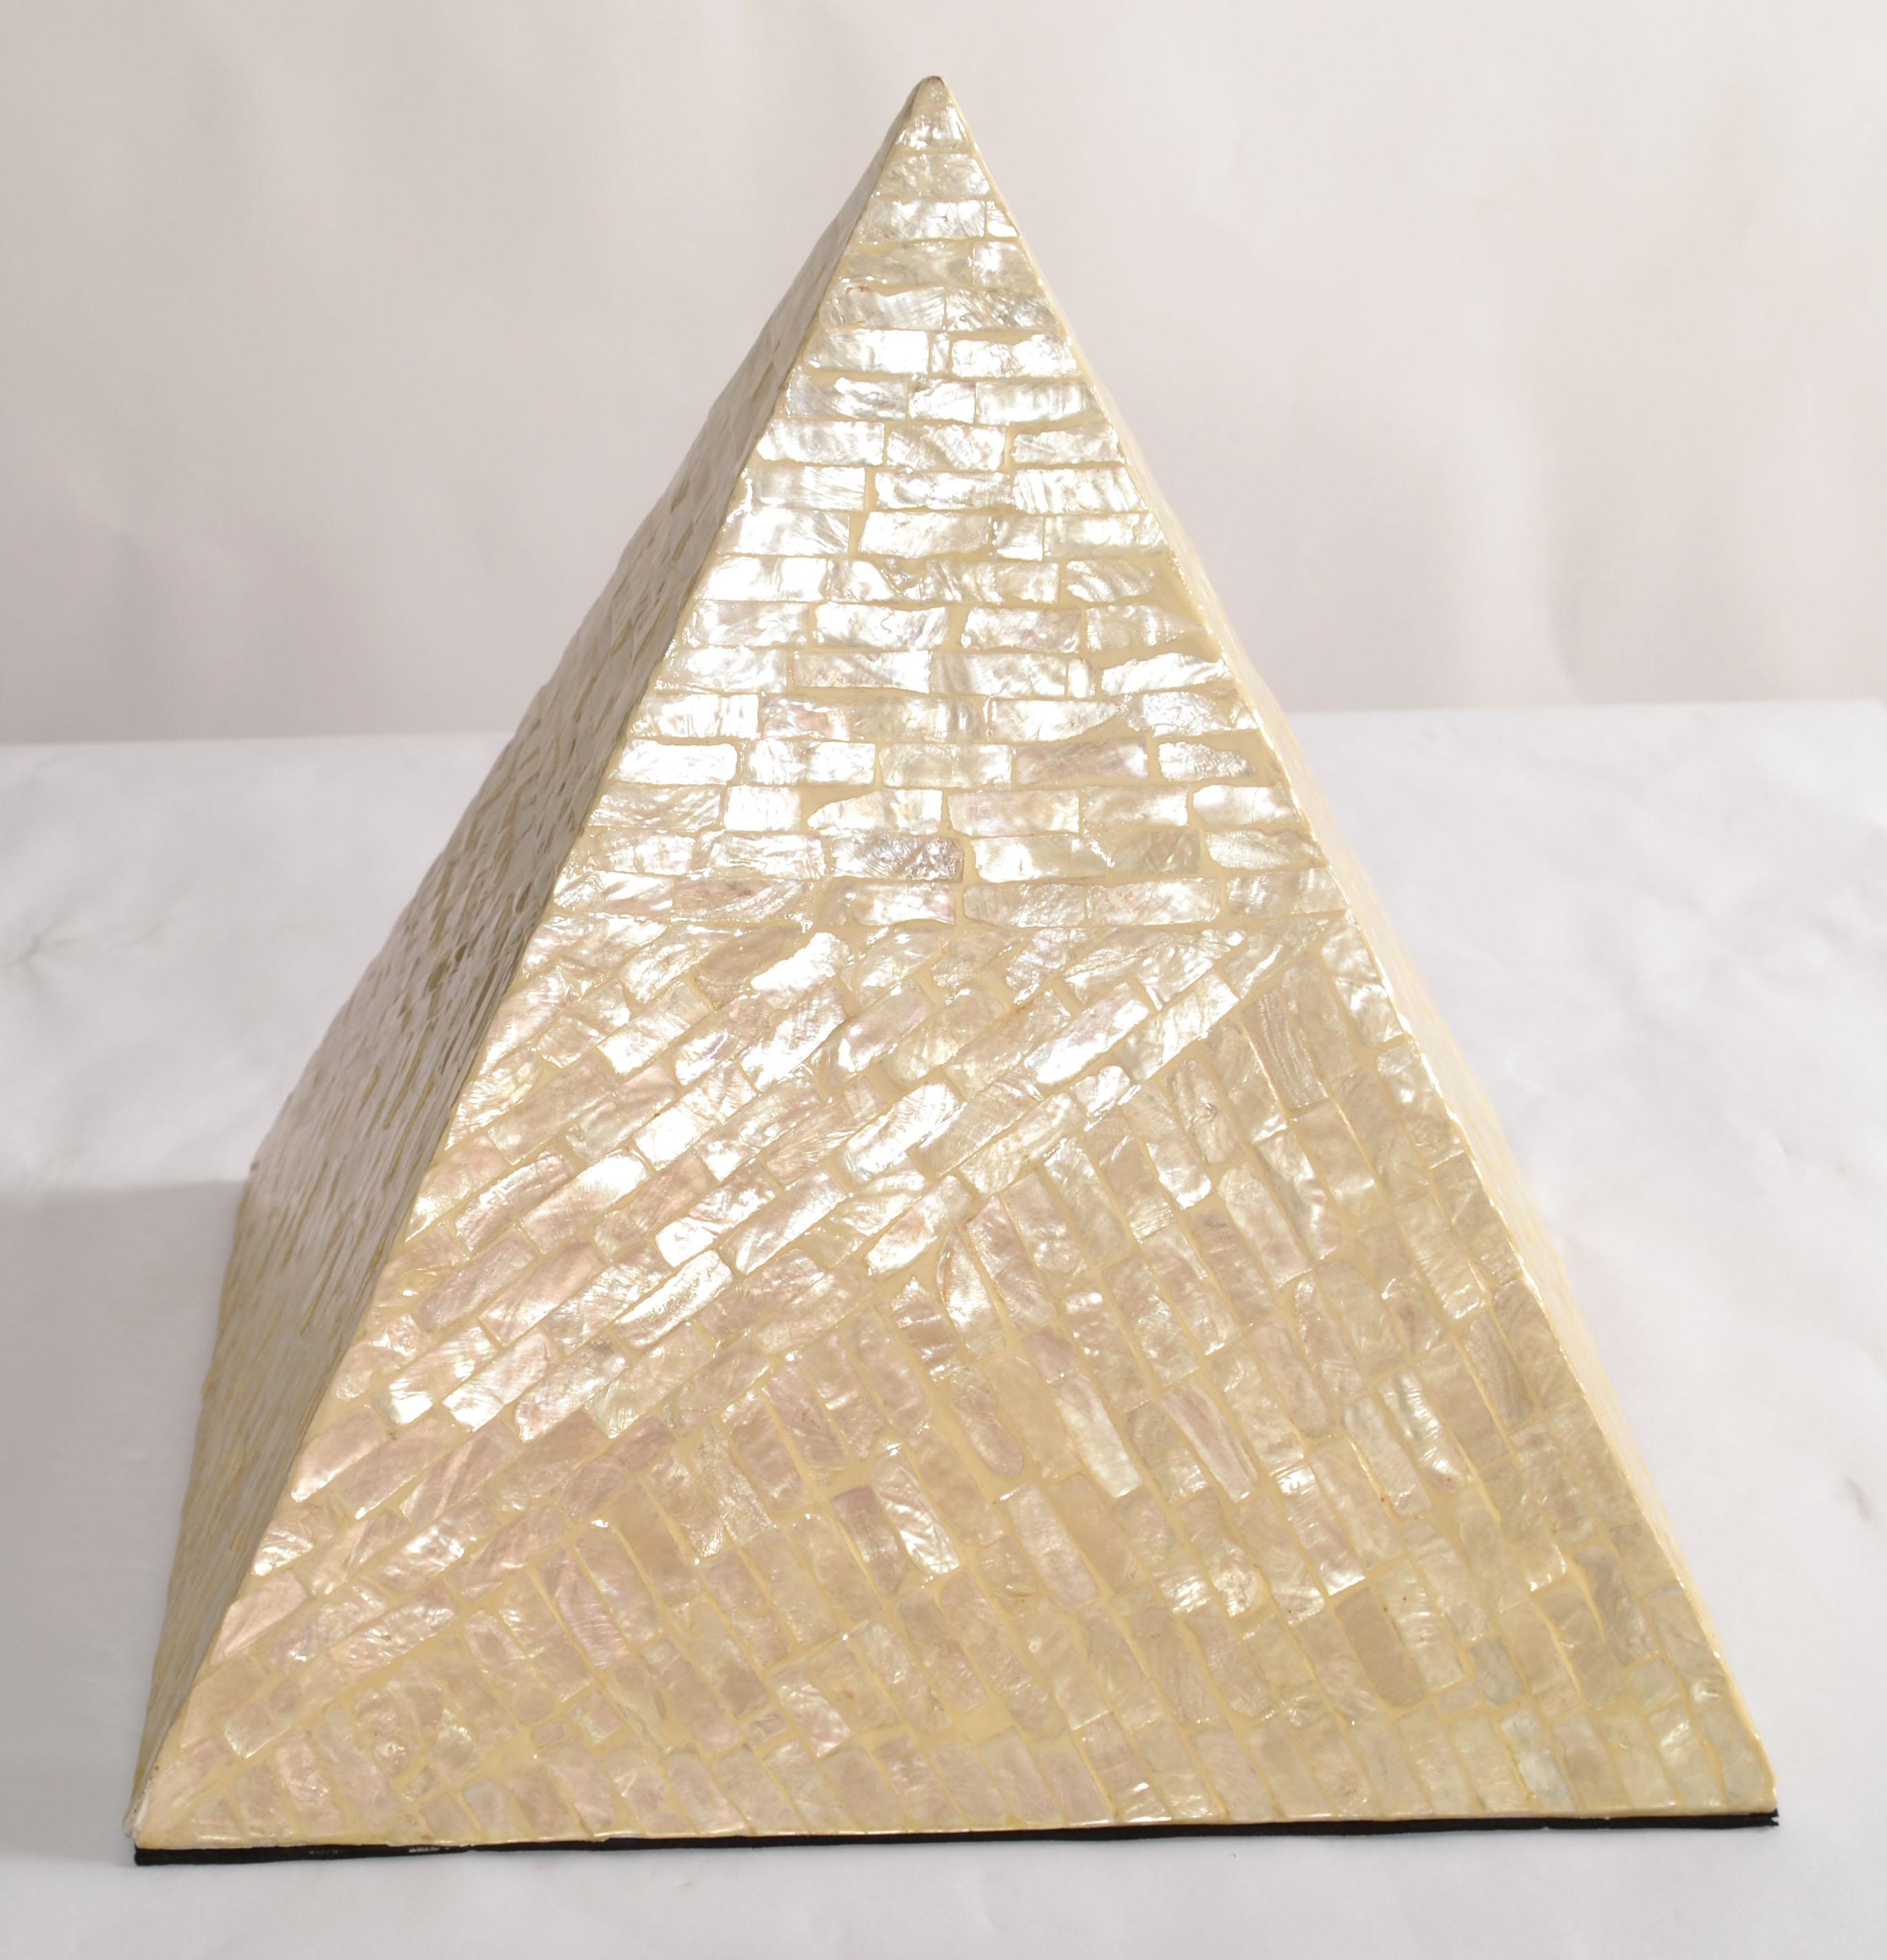 Arts and Crafts 1980s Italian Pyramid Mother Of Pearl Wood Sculpture Decorative Object Fine Art  For Sale